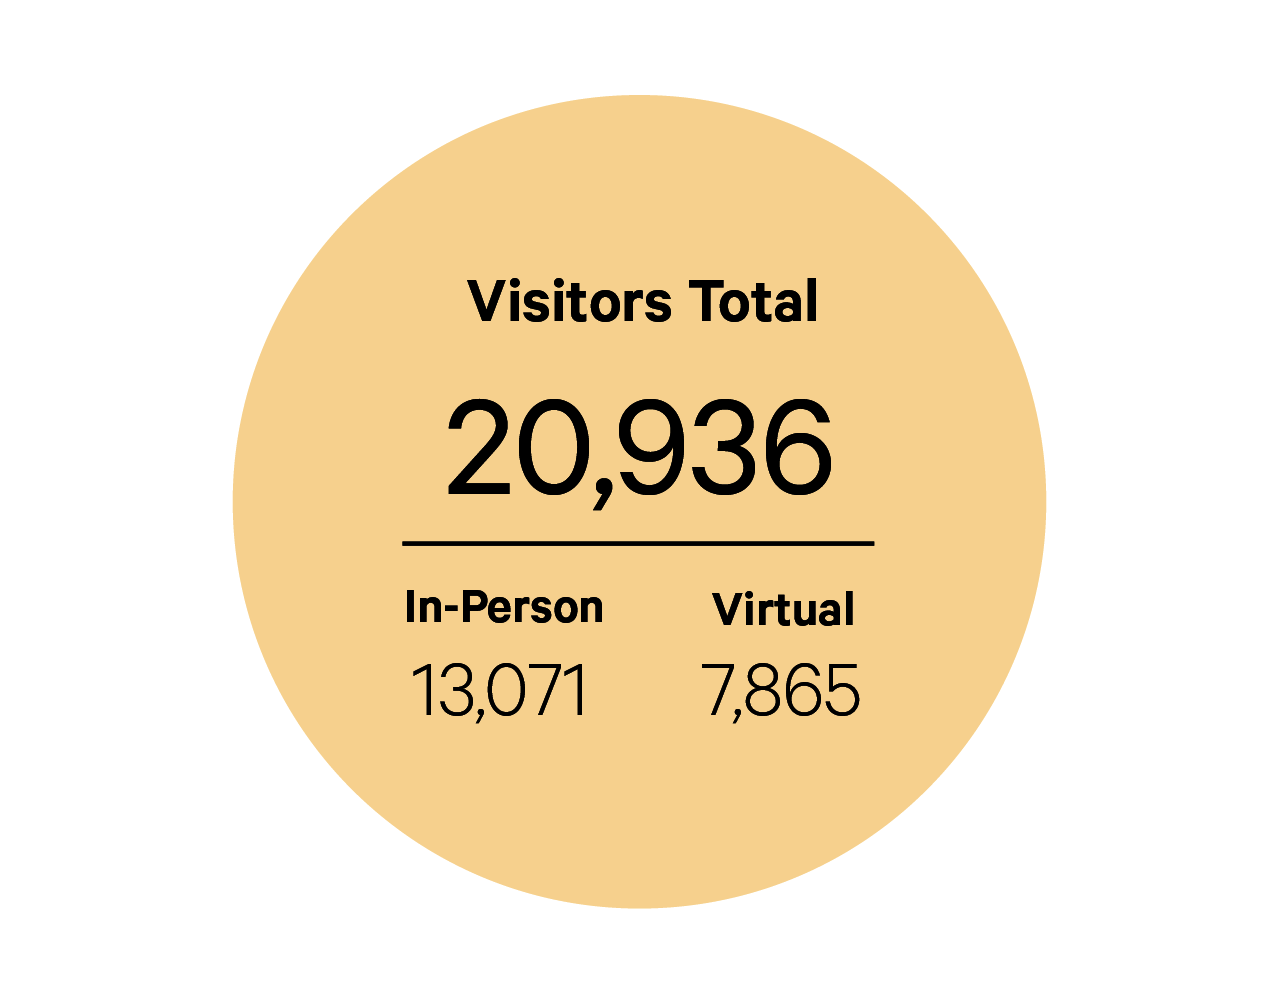 Pale yellow circle containing this text in black: “Visitors Total: 20,936. In-Person: 13,071. Virtual: 7865.”